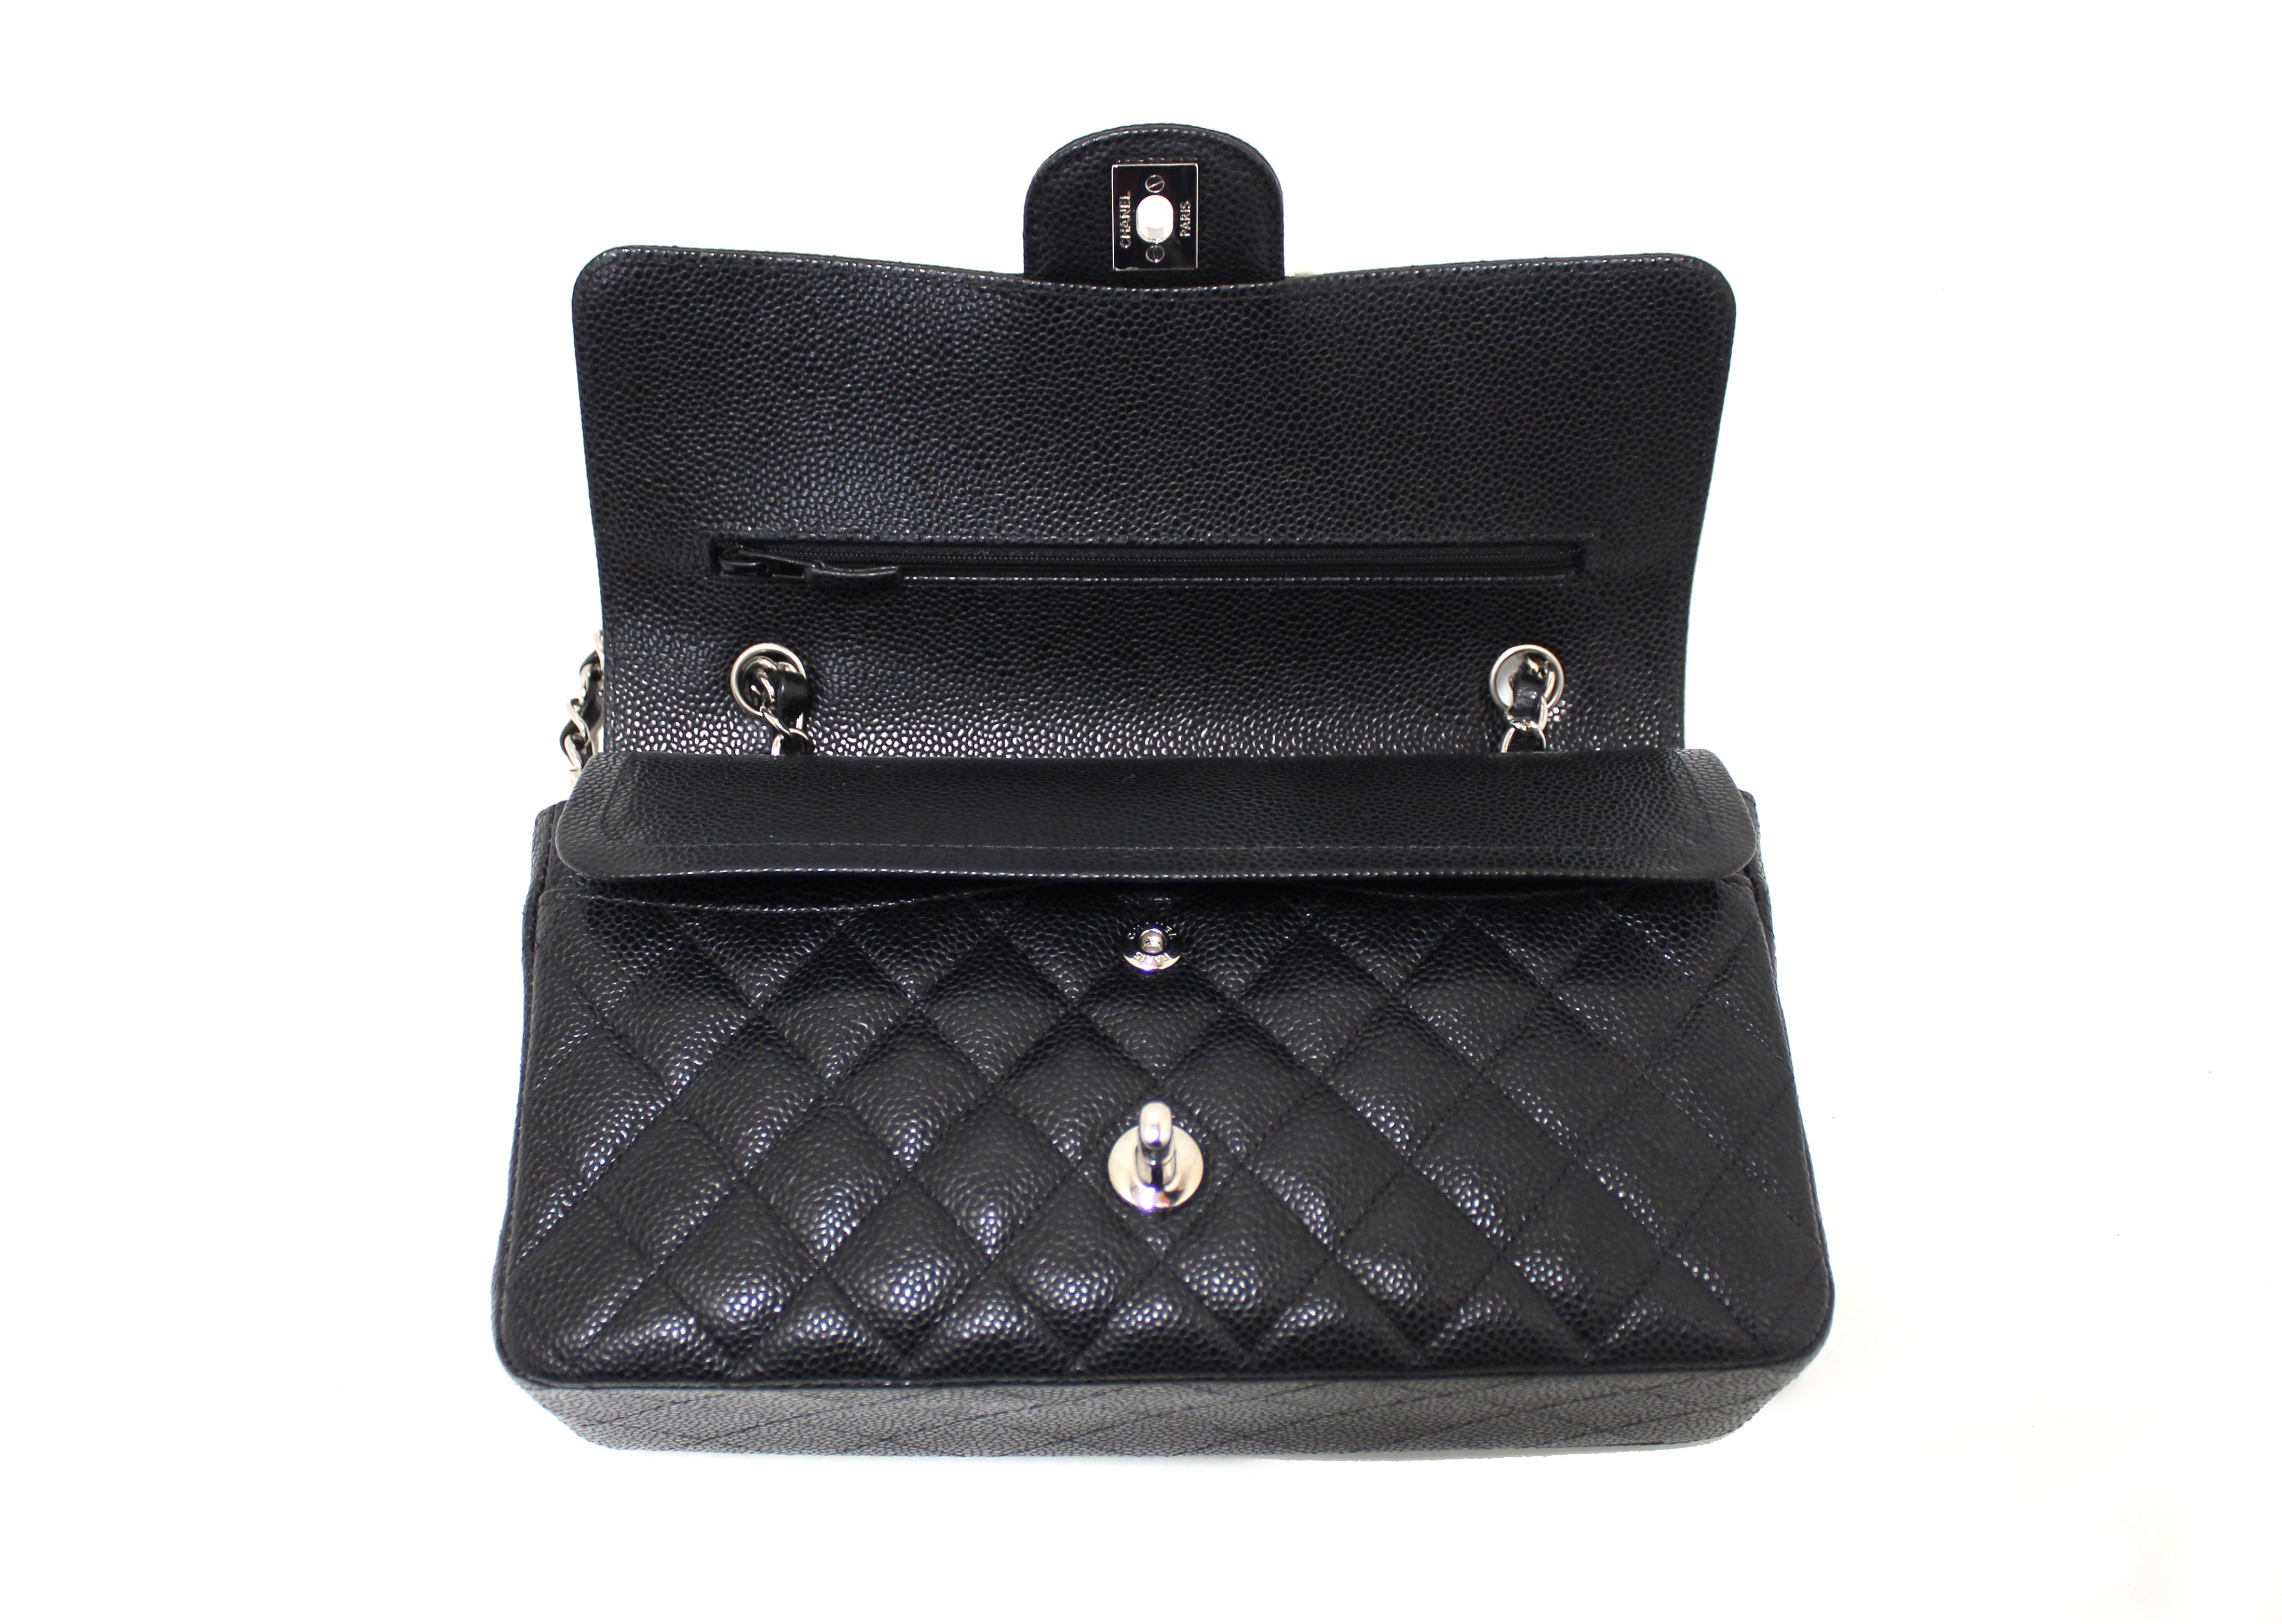 Authentic Chanel Black Quilted Caviar Leather Classic Small Flap